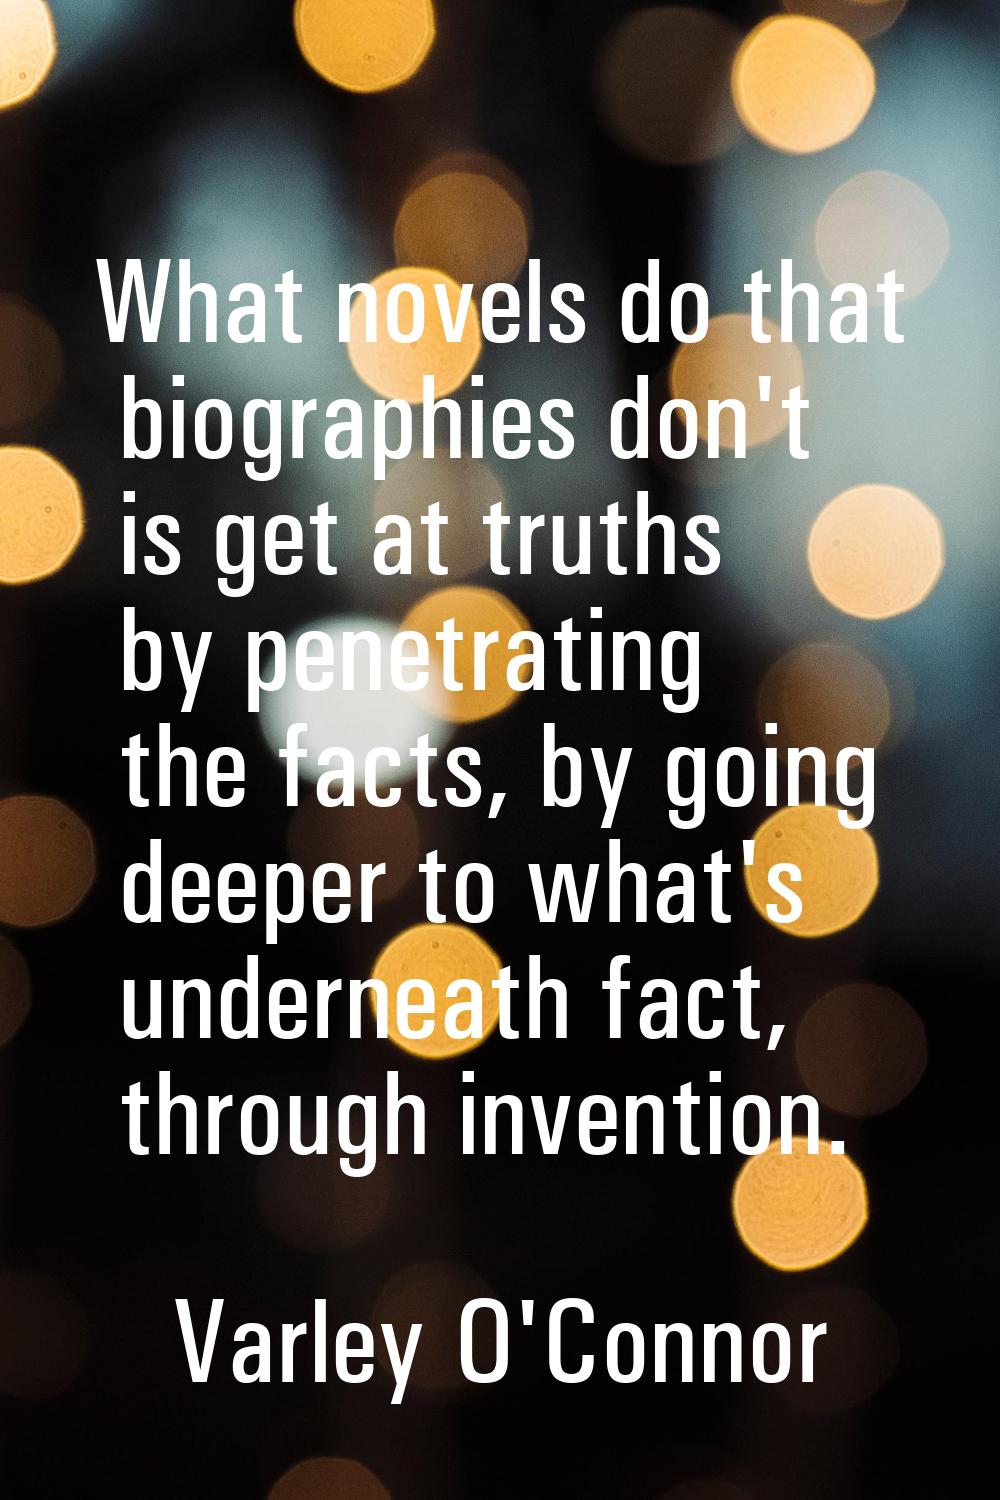 What novels do that biographies don't is get at truths by penetrating the facts, by going deeper to